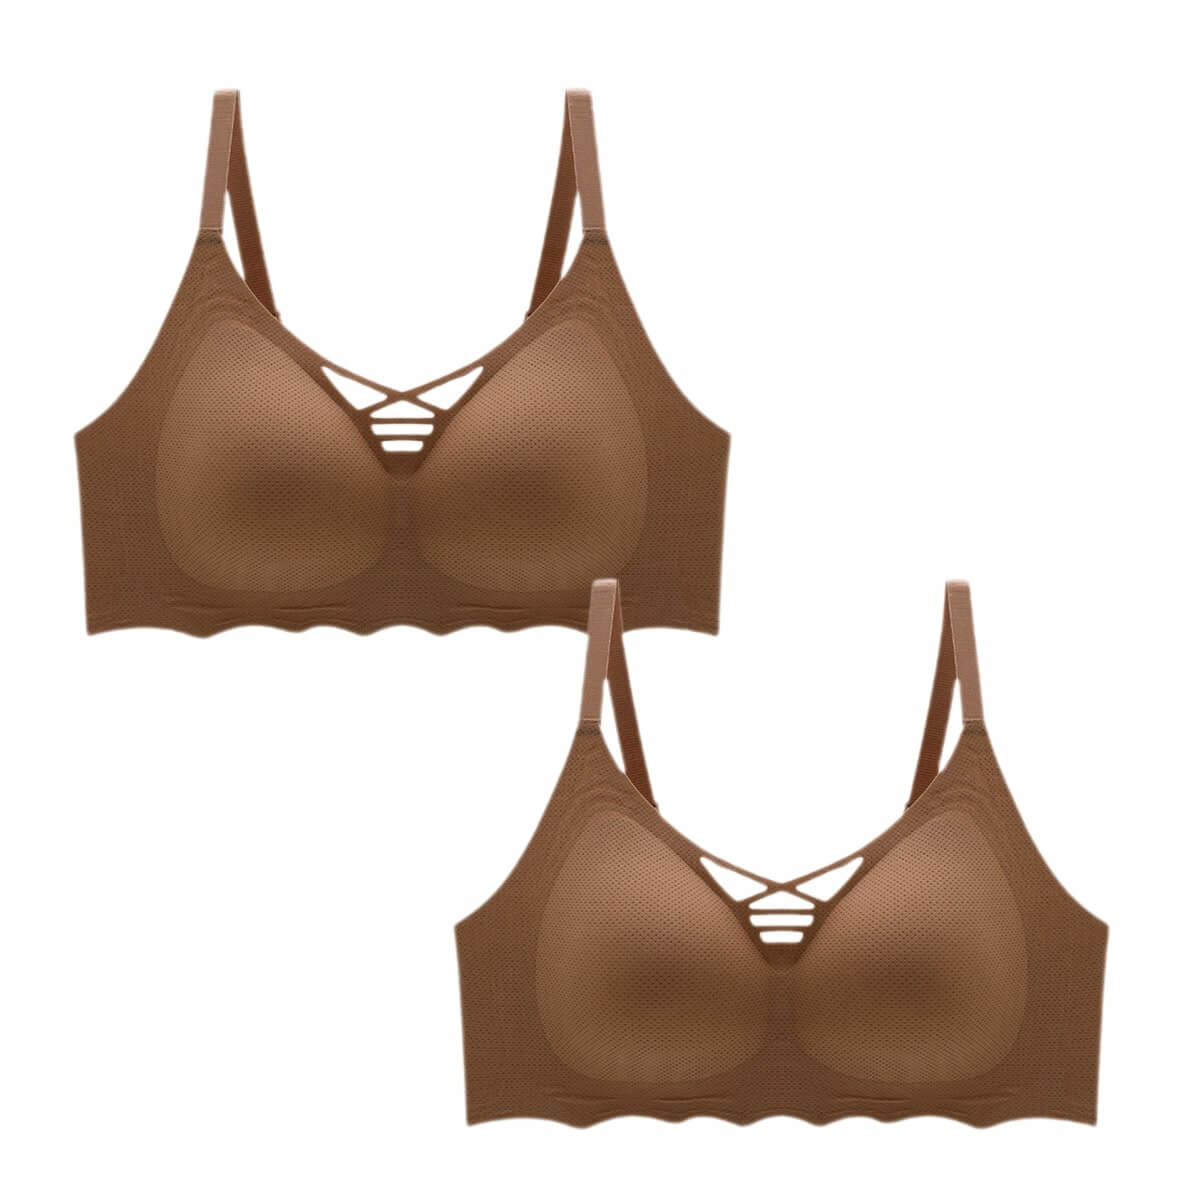 TRENDMADE New Mold Bra Molded Cups With Bow Design, Non Padded, Seamless Bra,  Non Wired, Comfortable